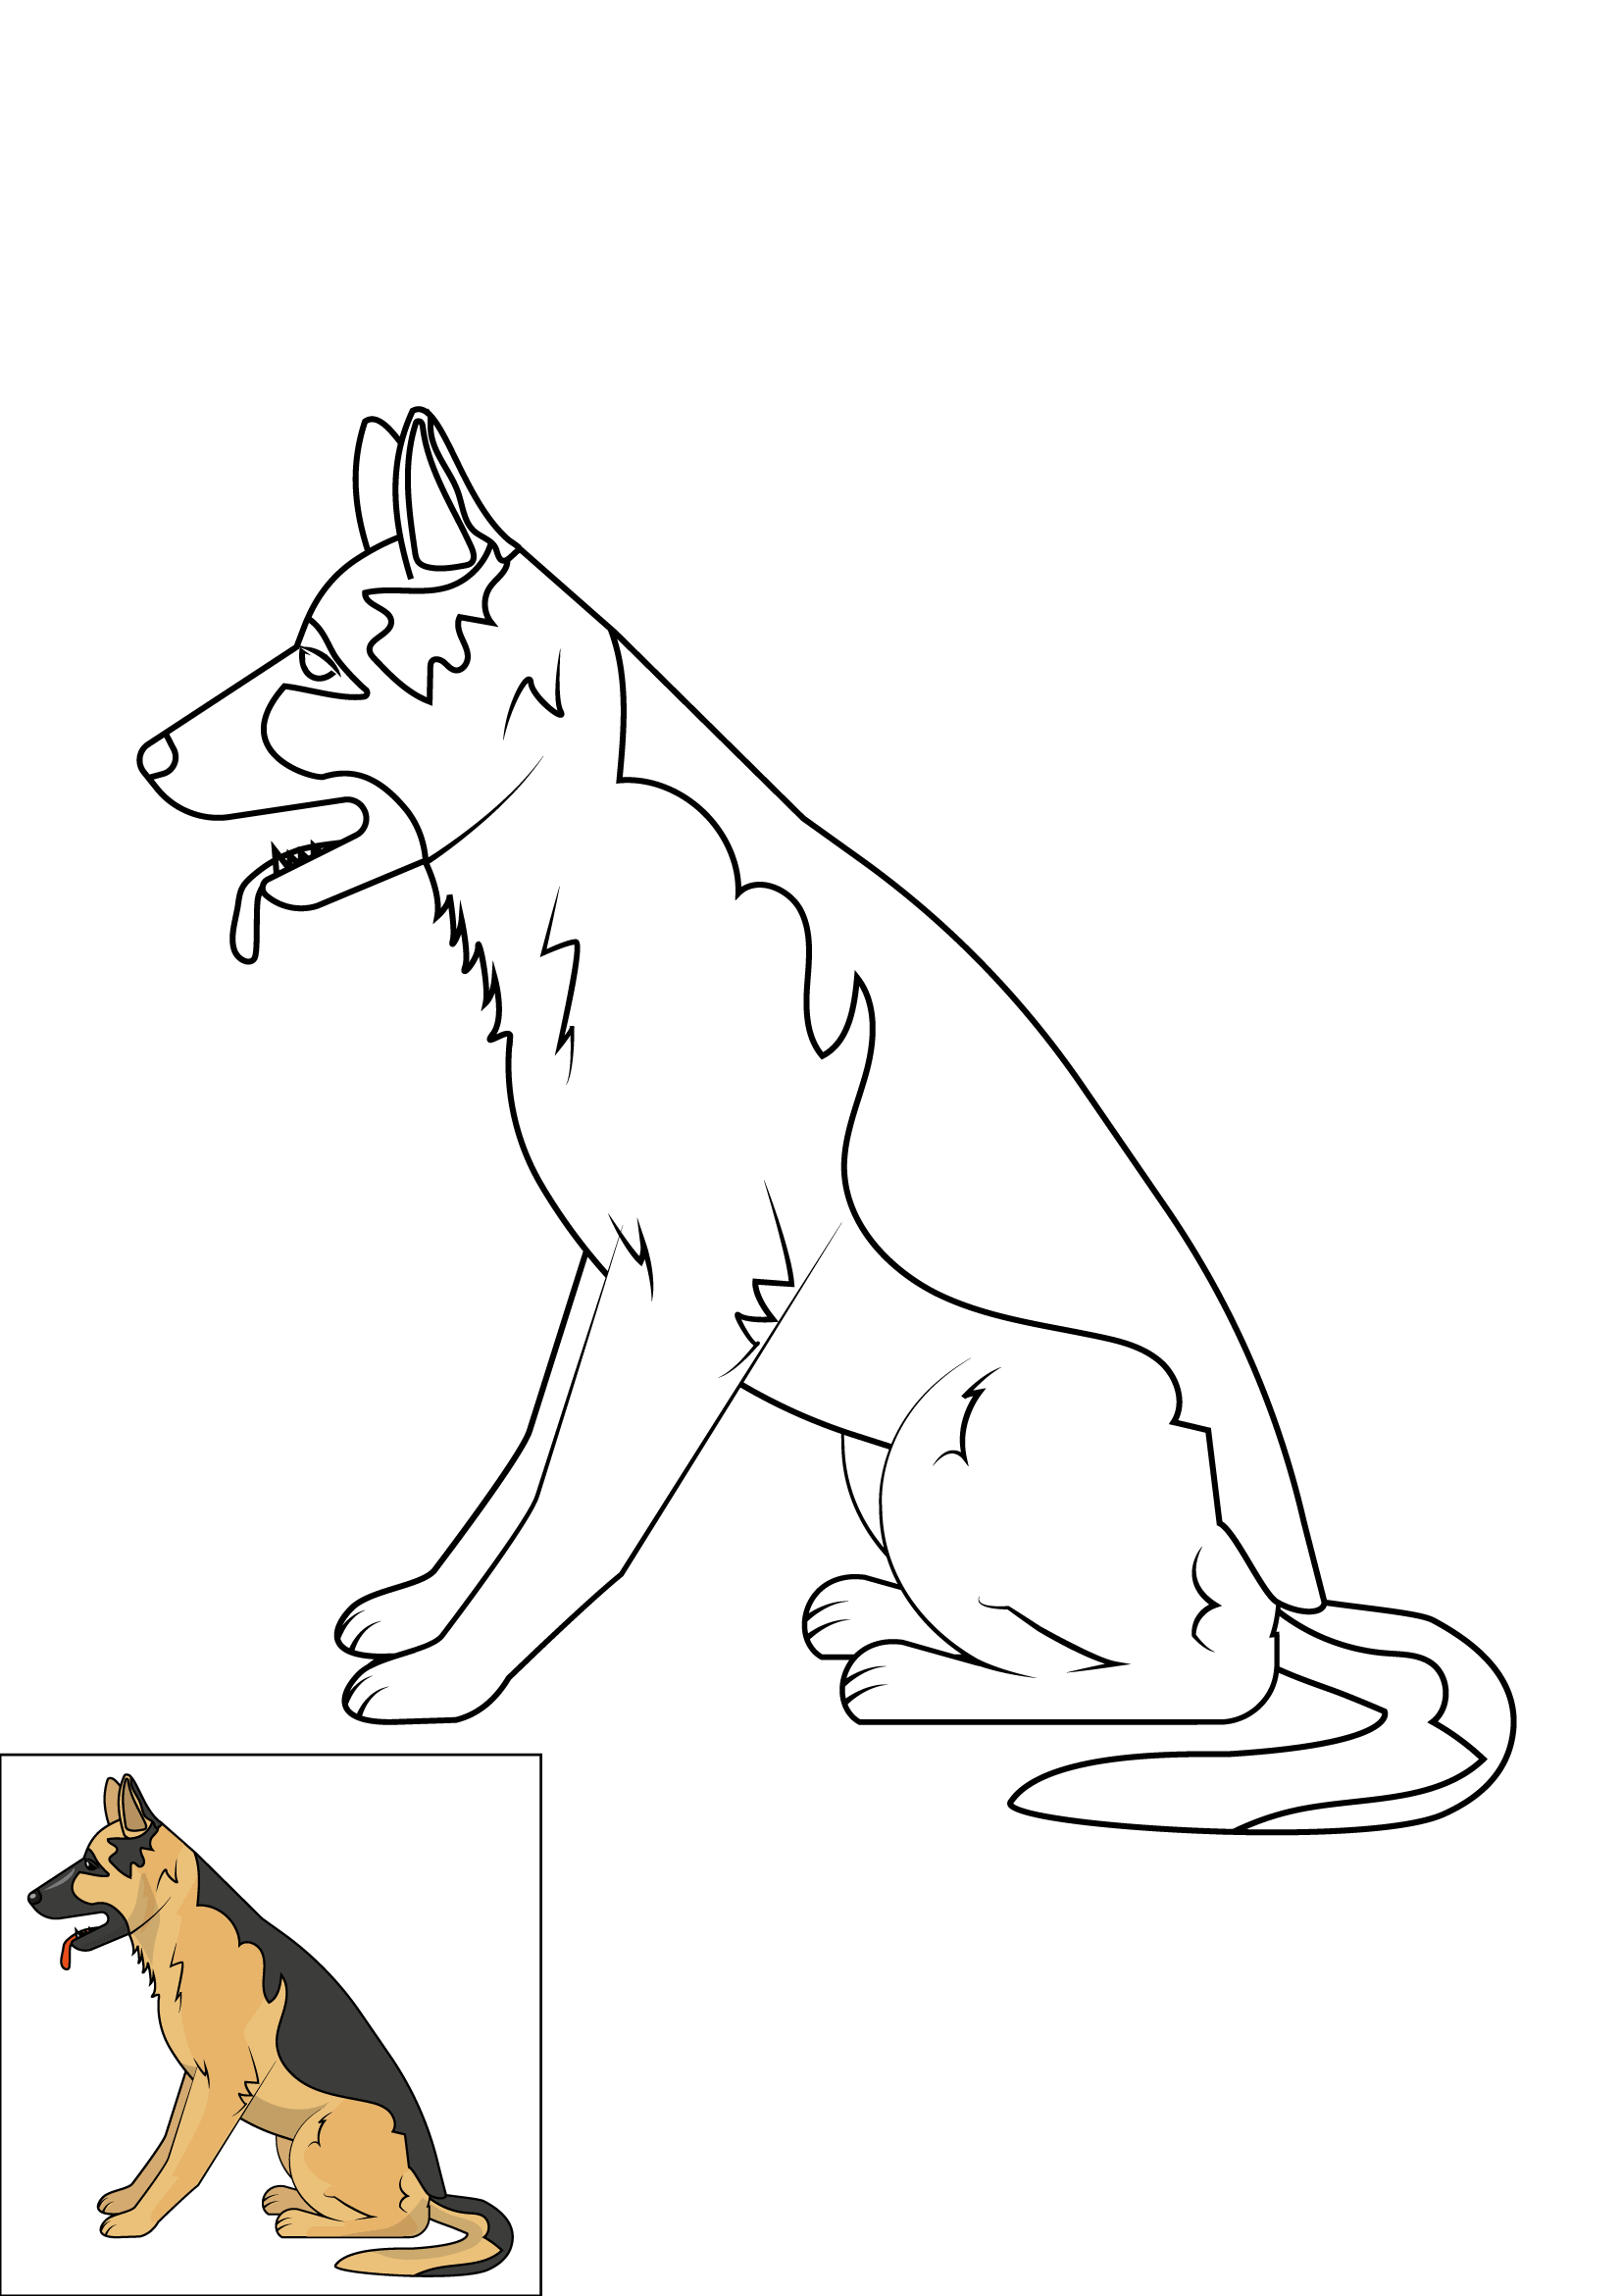 How to Draw A German Shepherd Step by Step Printable Color